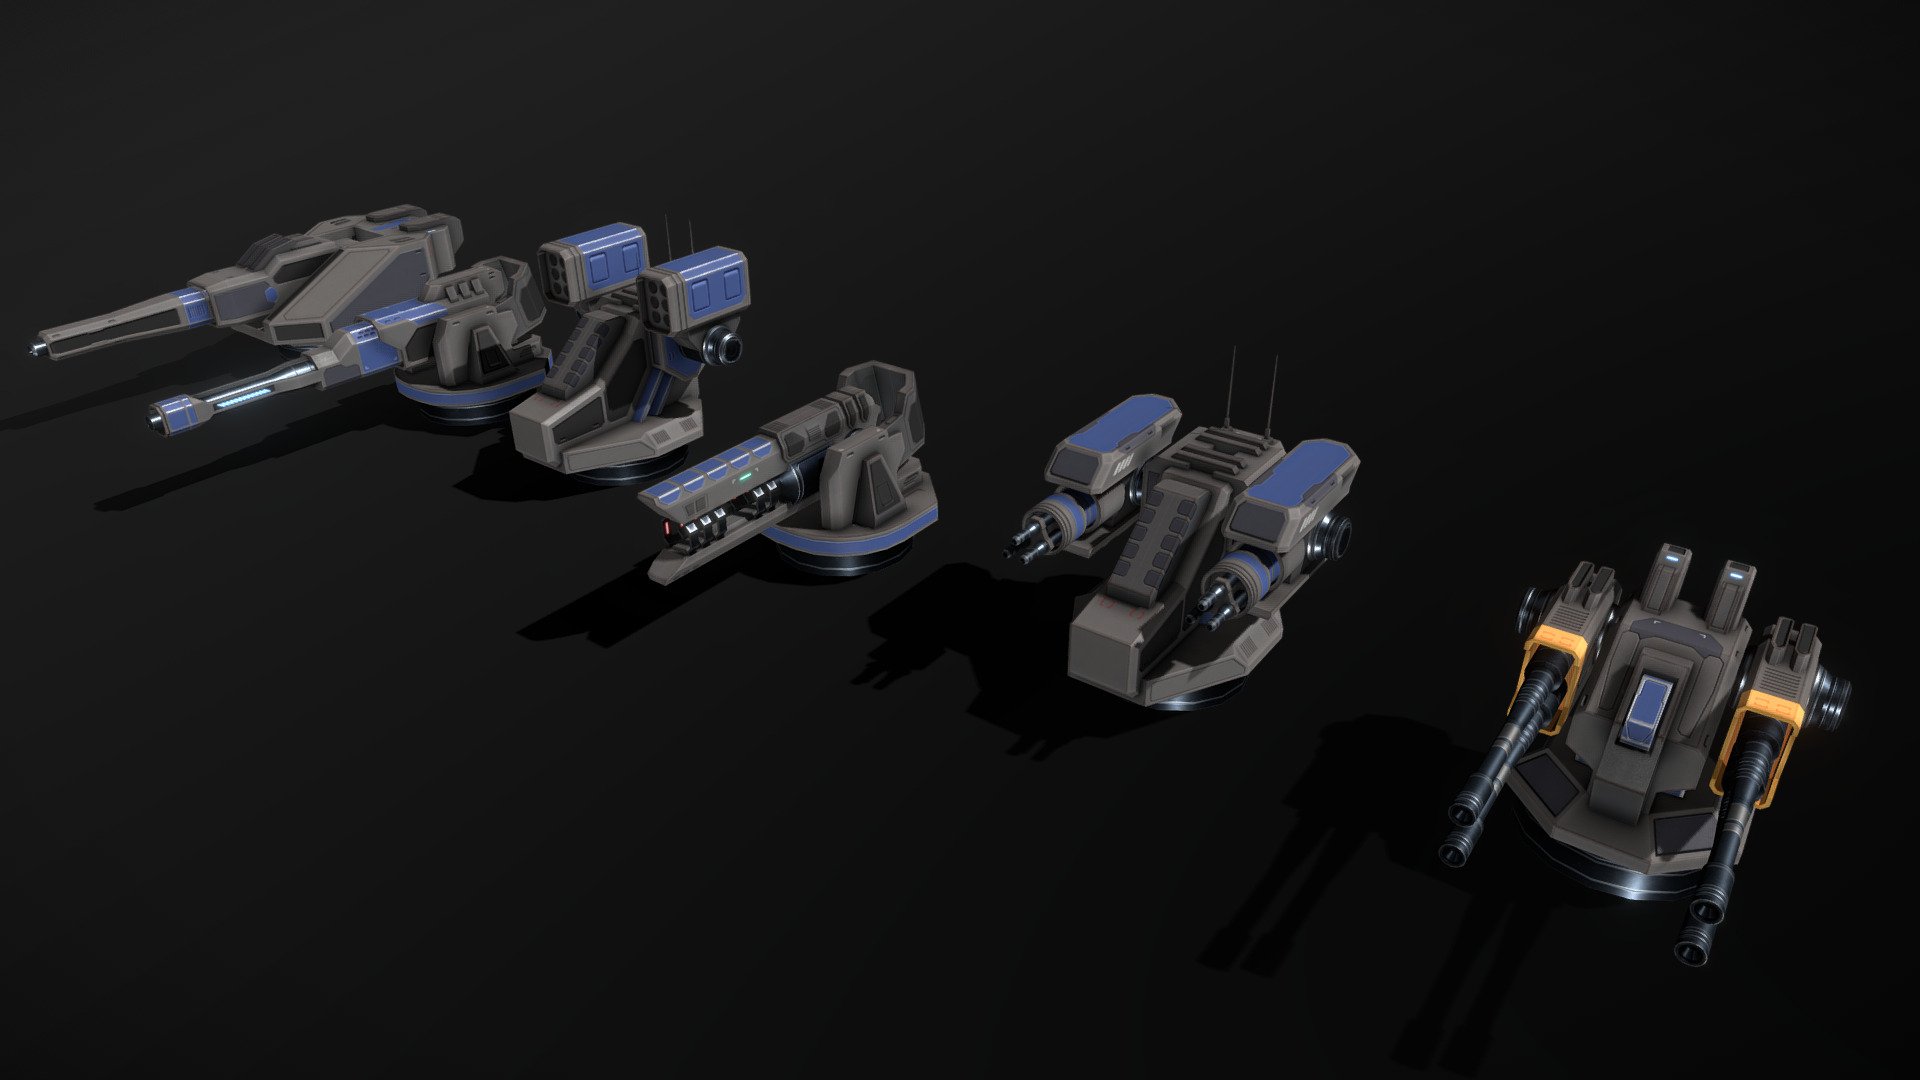 These are modular low-poly and game-ready scifi turrets. Modular wall segments are included too.

The barrel(s) are separate meshes and can be animated with a keyframe animation tool. The turrets can rotate left/right, the barrel can elevate up/down.

The model comes with several differently colored texture sets. The PSD file with intact layers is included.

If you have purchased this model please make sure to download the “additional file”.  It contains FBX and OBJ meshes, full resolution textures and the source PSDs with intact layers. The meshes are separate and can be animated (e.g. firing animations for gun barrels, rotating turrets, etc) 3d model